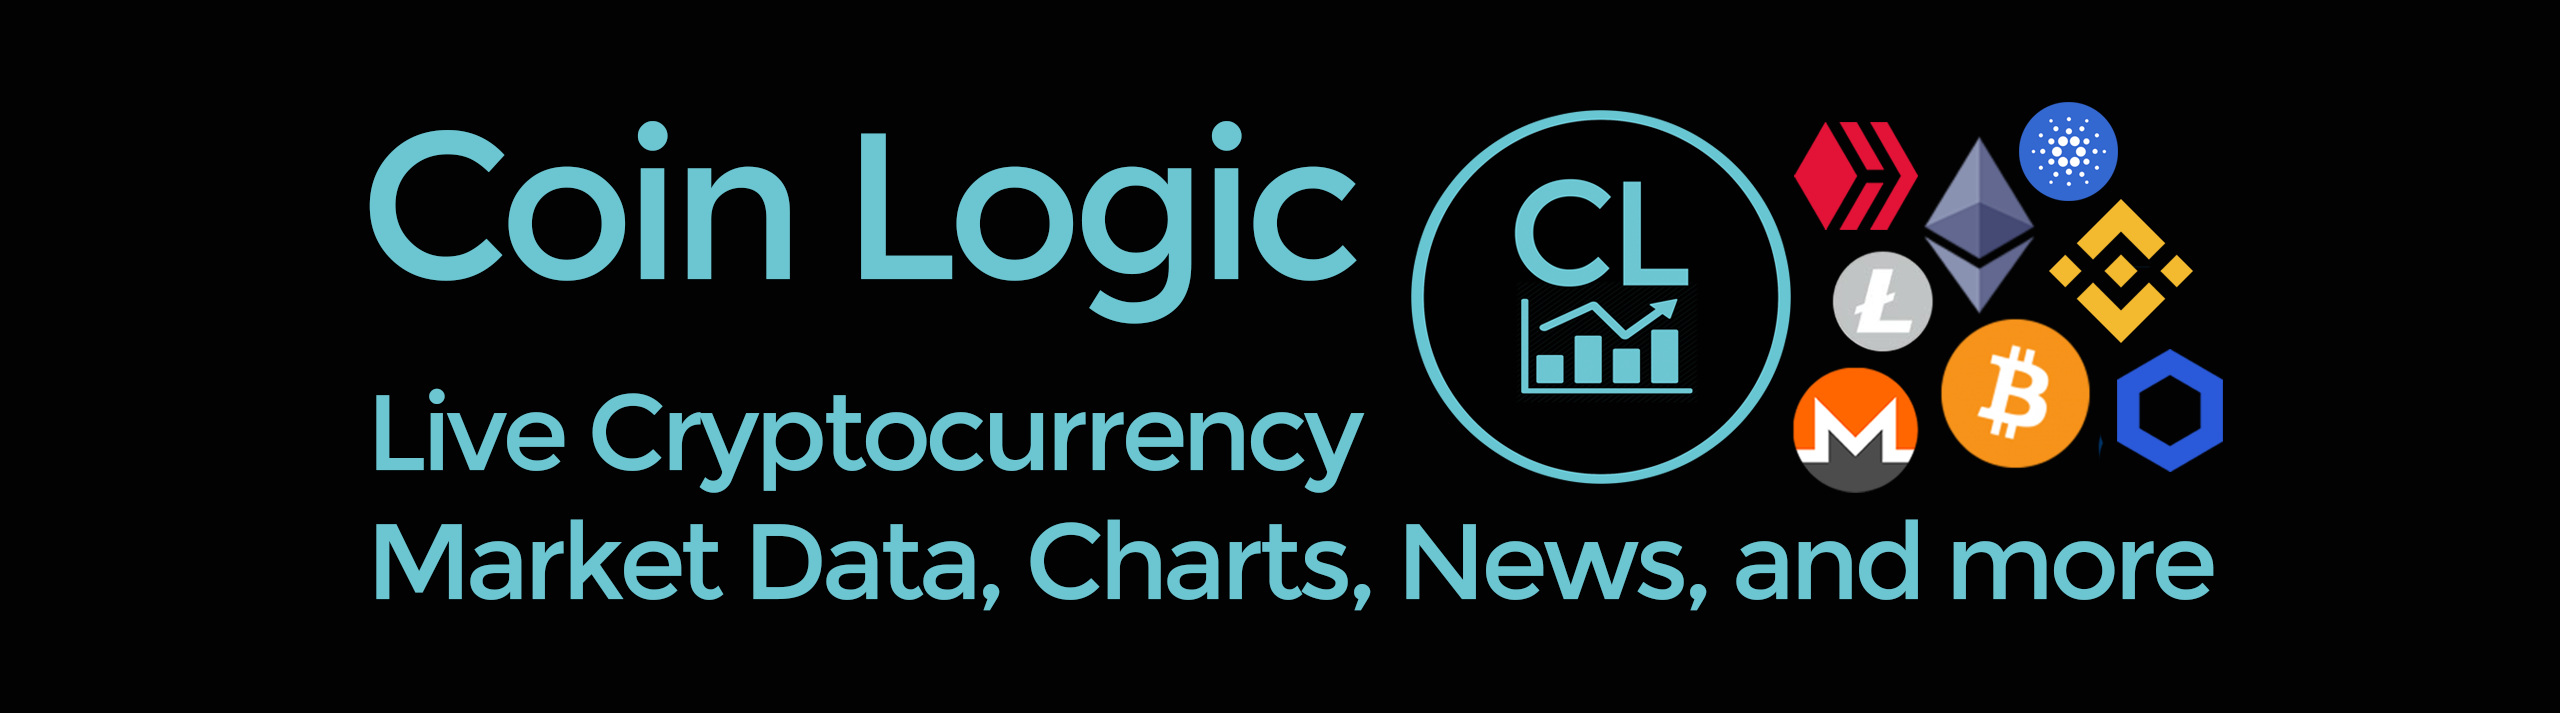 relative strength index rsi coin logic banner